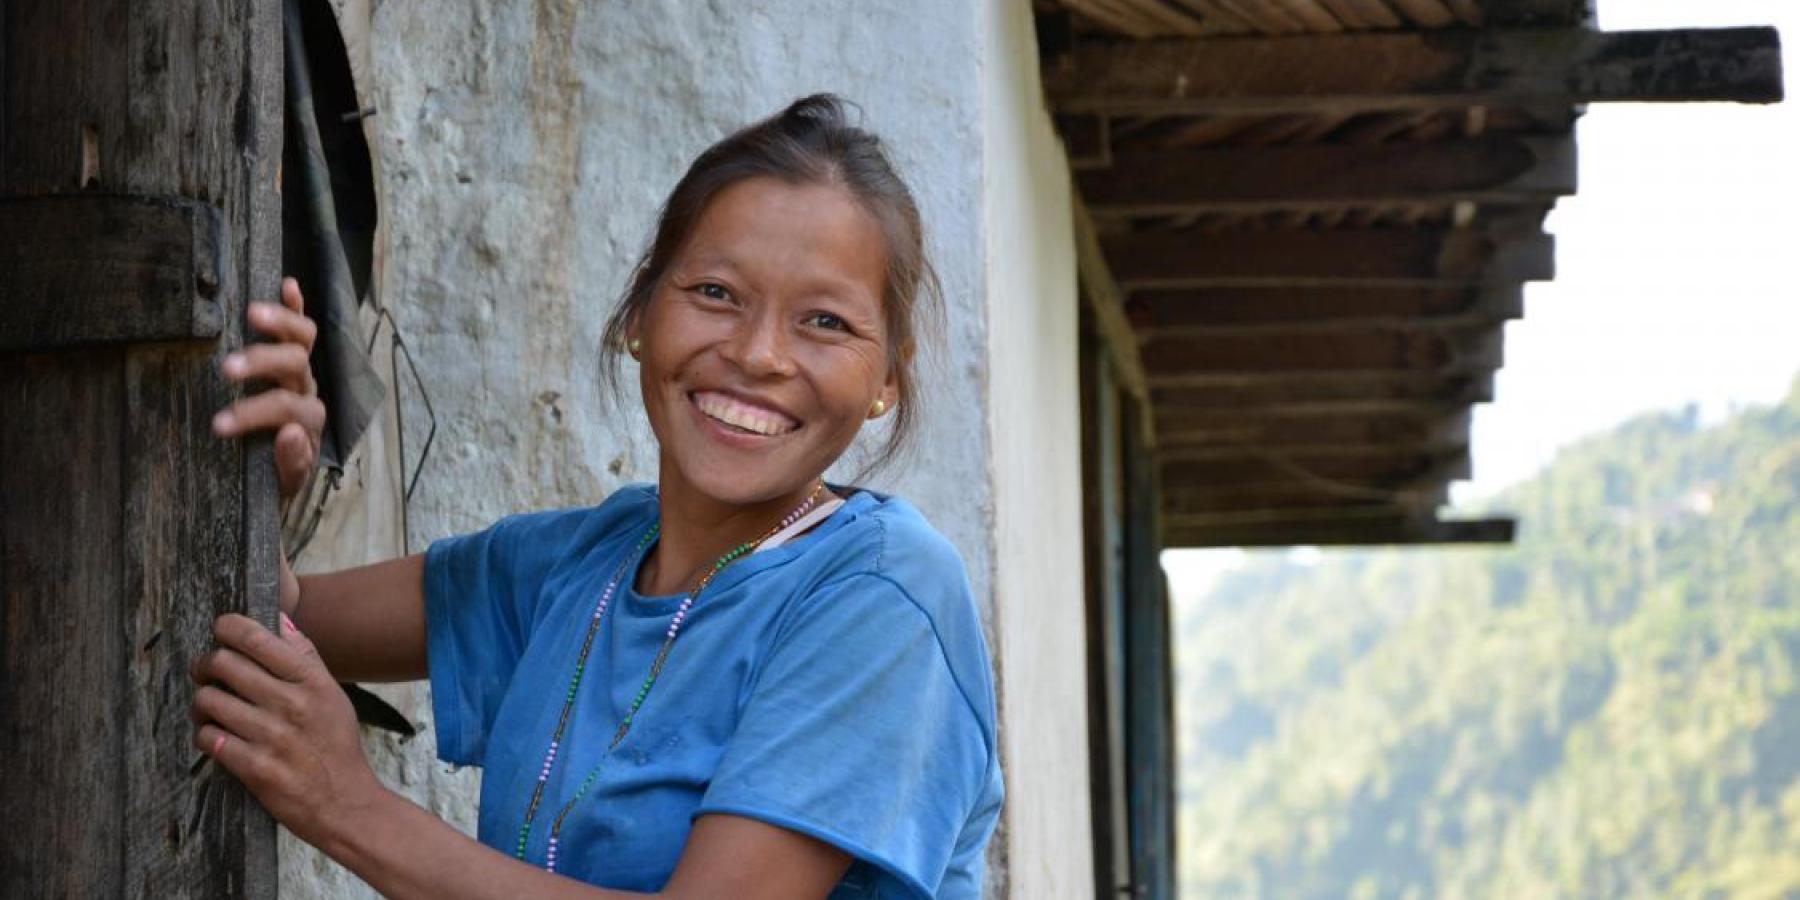 A smiling mother outside her home in Nepal.